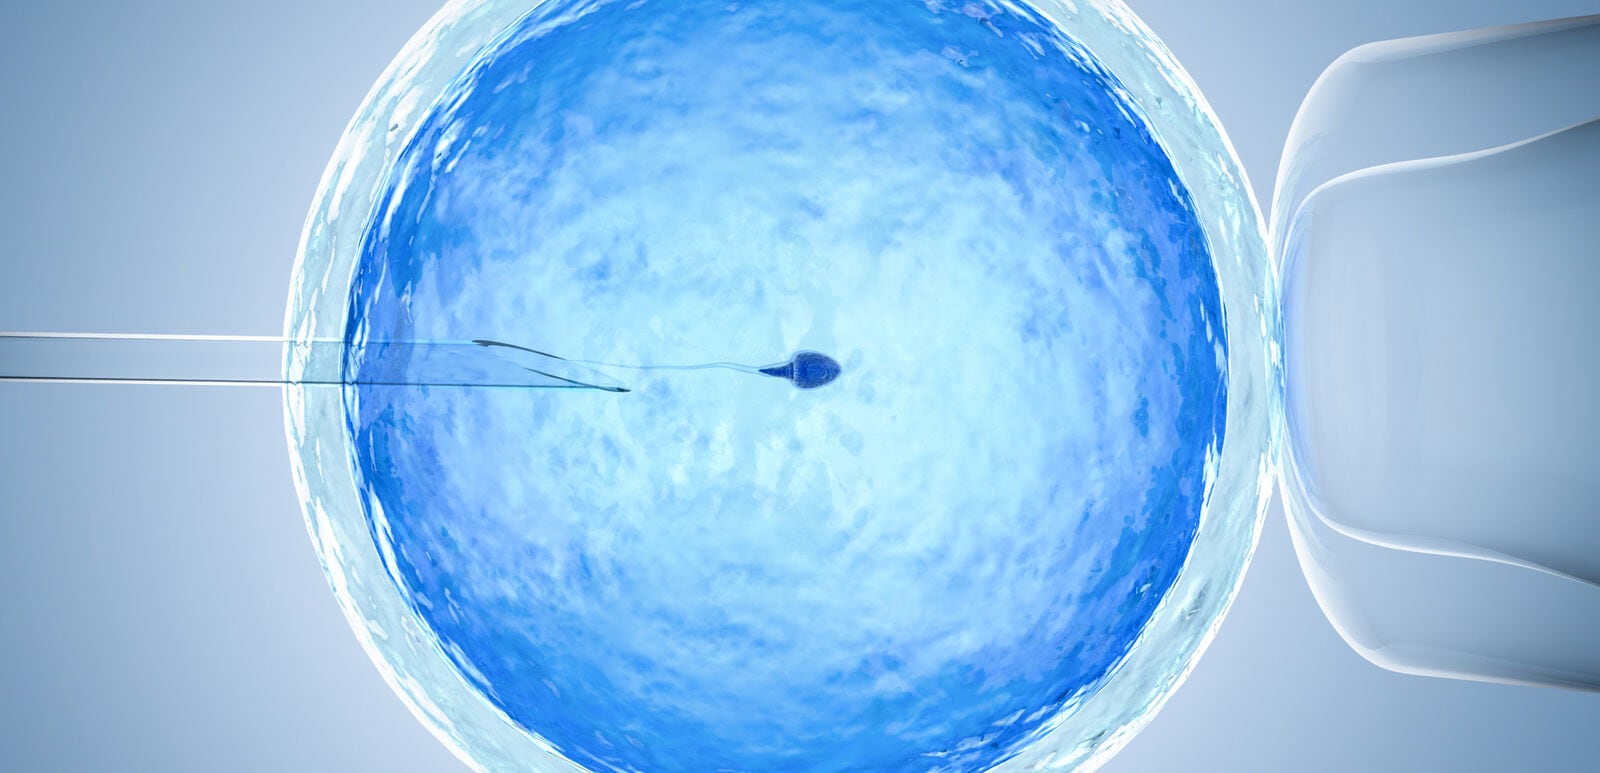 Illustration of in vitro fertilization showing a sperm being injected into an egg using a microscopic needle.